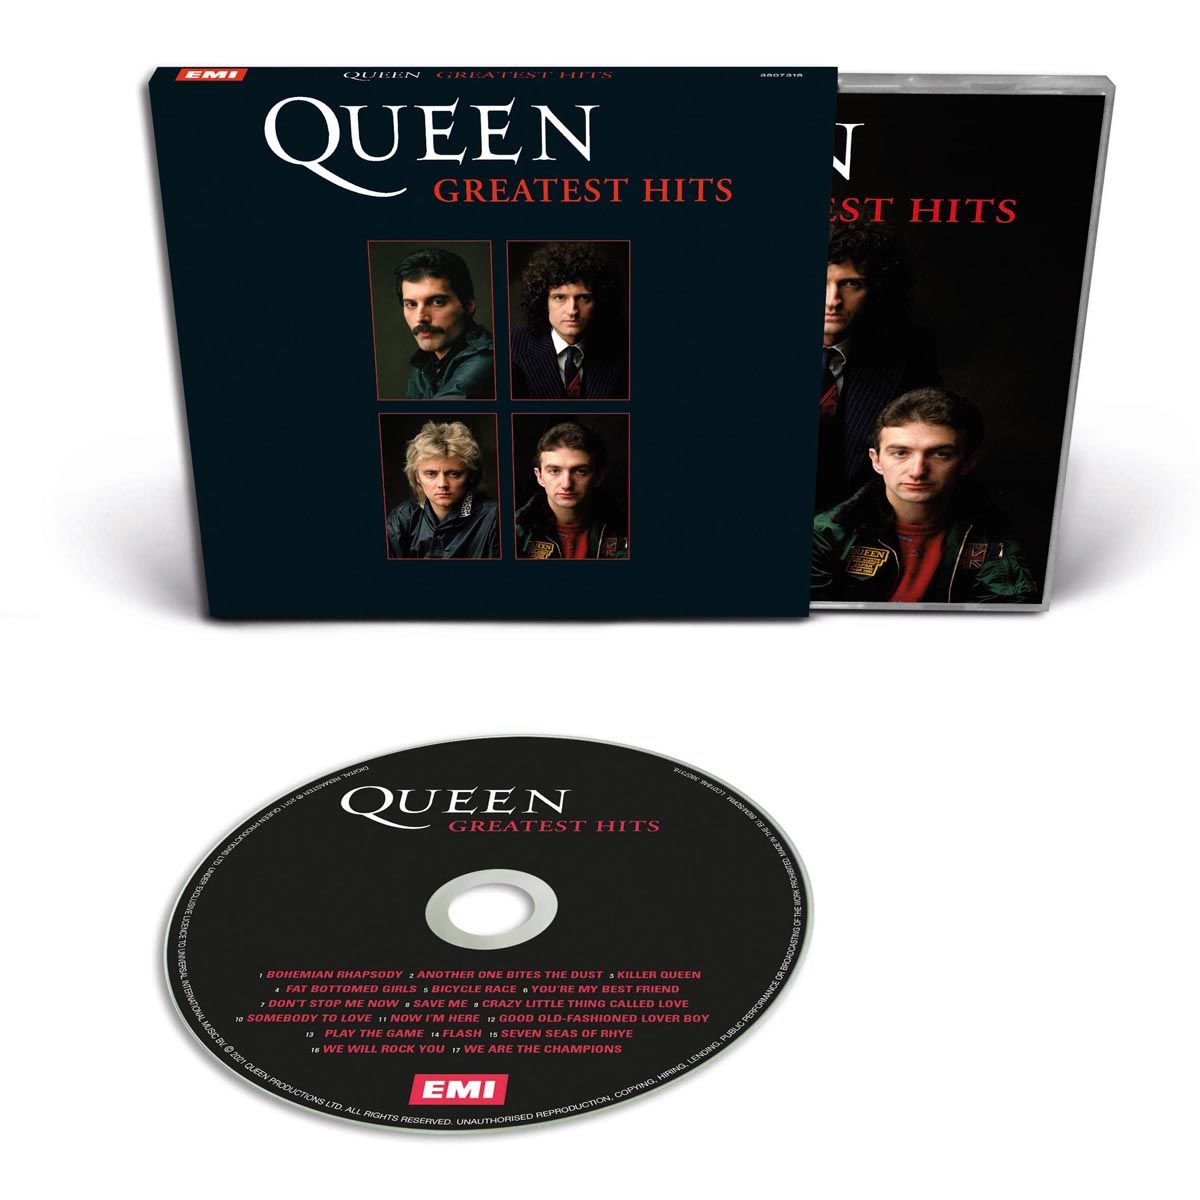 Queen - Greatest Hits Collectors Edition